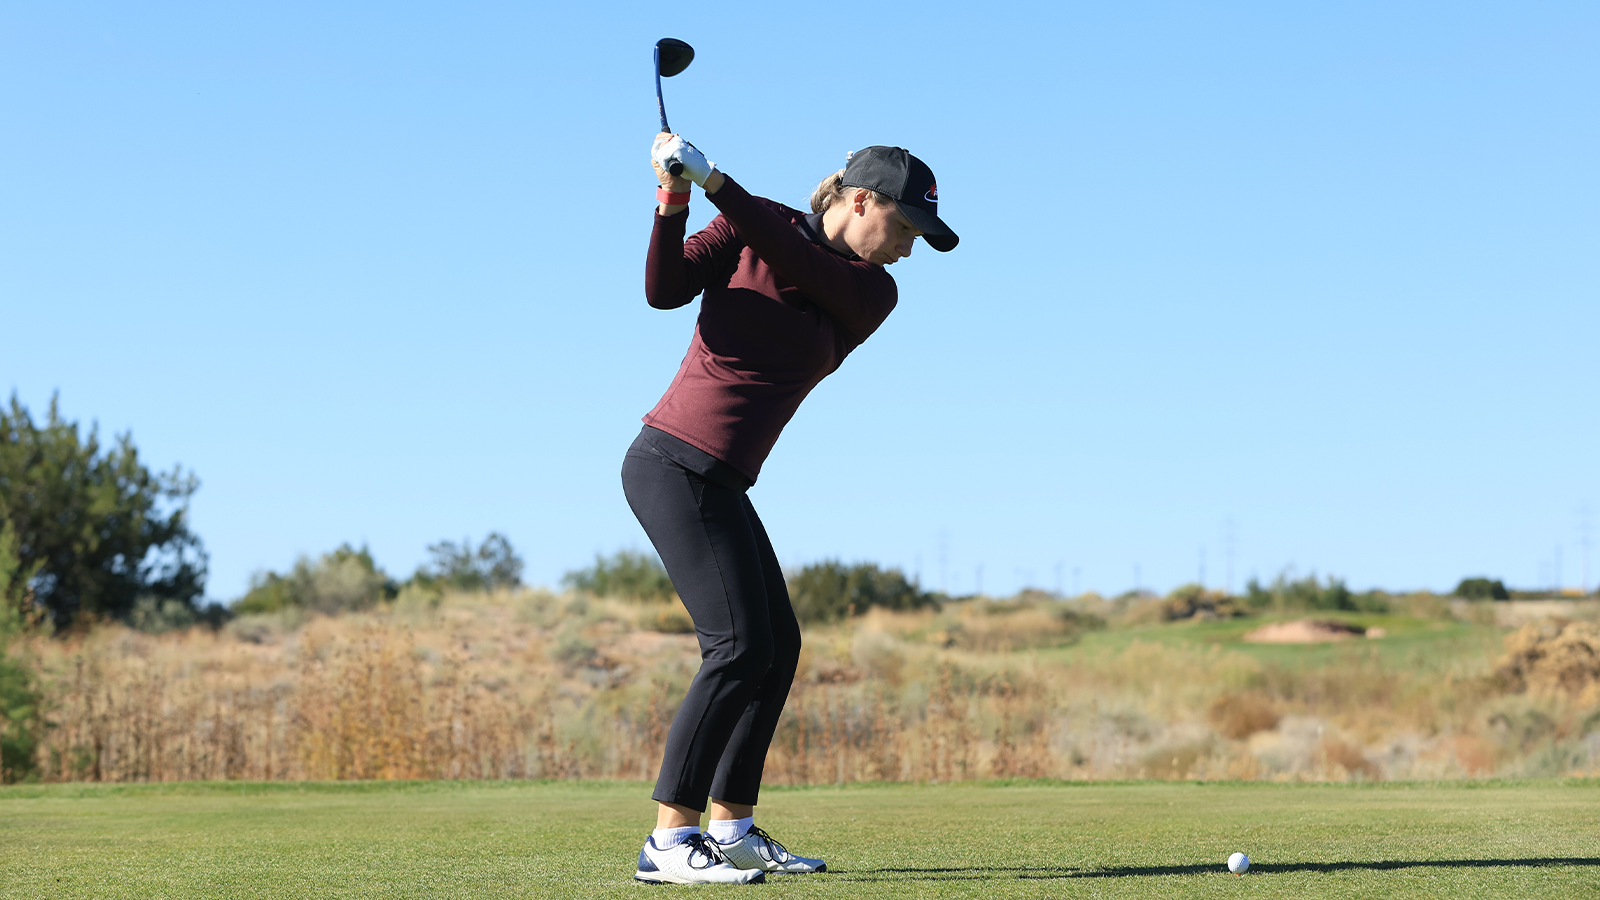 Caroline Ciot of Team Canada hits her tee shot during the final round of the 2nd Women's PGA Cup at Twin Warriors Golf Club on Saturday, October 29, 2022 in Santa Ana Pueblo, New Mexico. (Photo by Sam Greenwood/PGA of America)